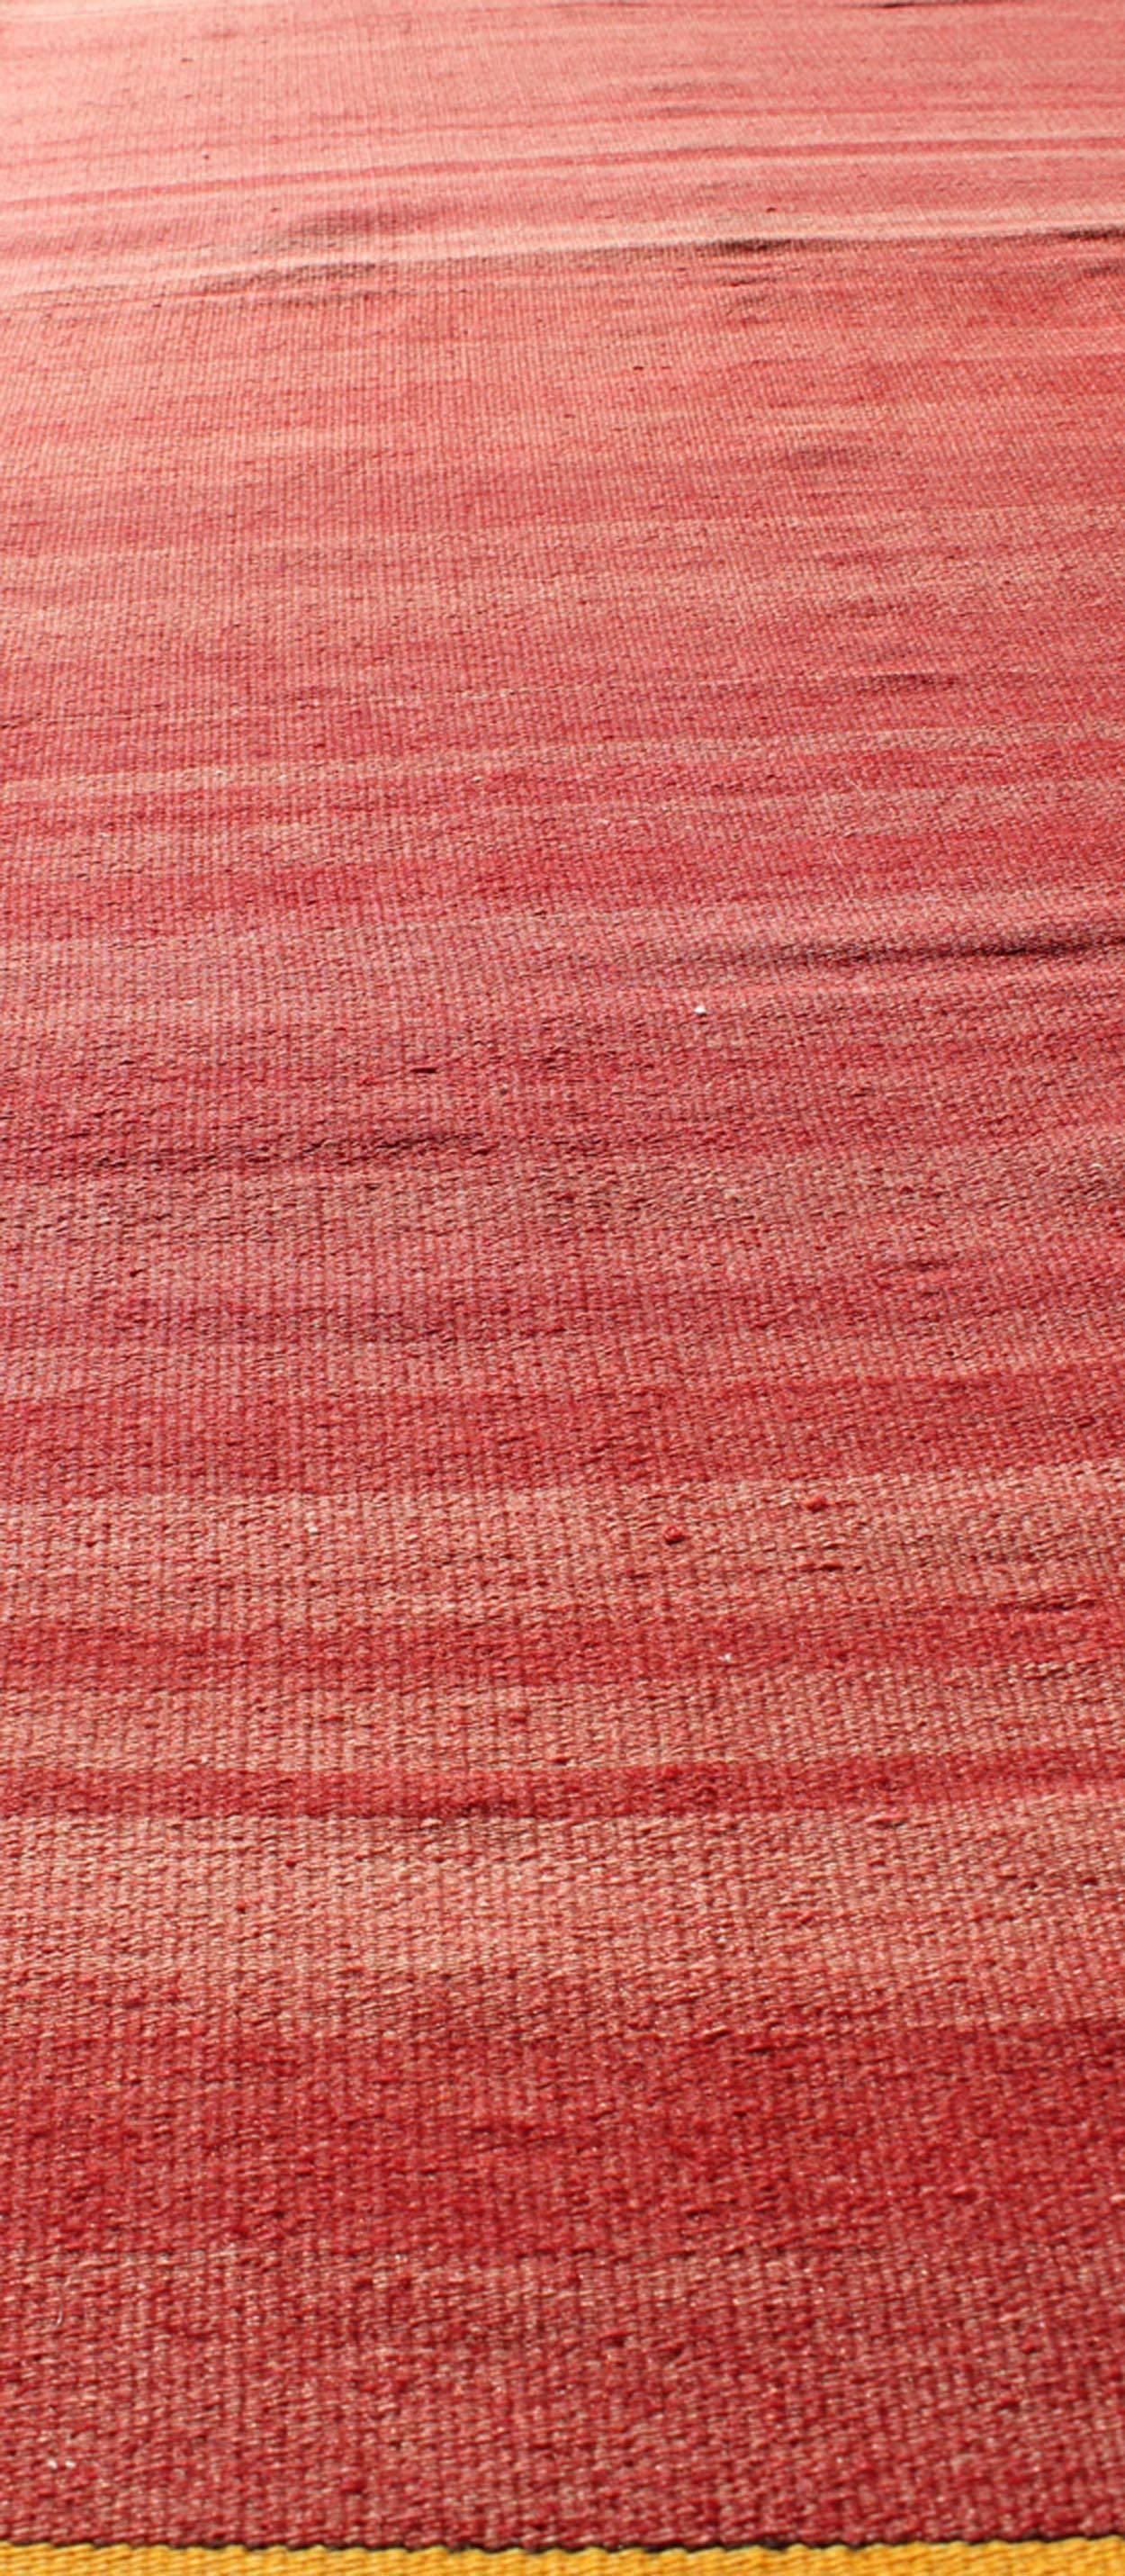 20th Century Red, Yellow, and Salmon Pink Striped Midcentury Vintage Turkish Kilim Rug For Sale